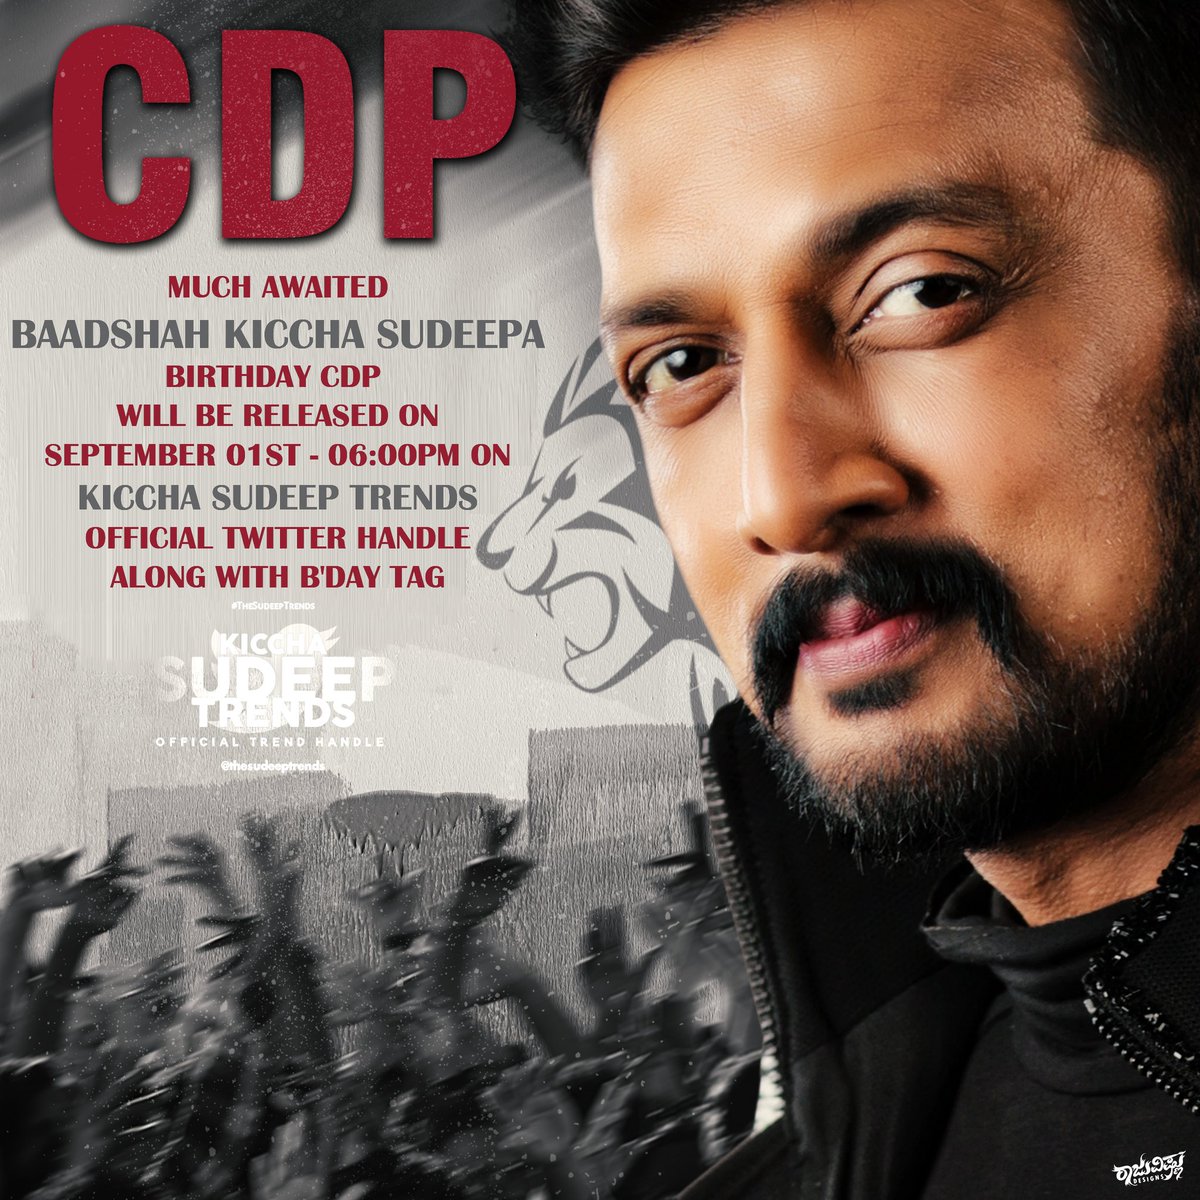 Much awaited Baadshah @KicchaSudeep anna CDP will be released on Sept 1st at 6 Pm on Kiccha Sudeep Trends official handle !! Official B'day tag also to be revealed along with the CDP. #Kicchotsava2023 #KicchaSudeep